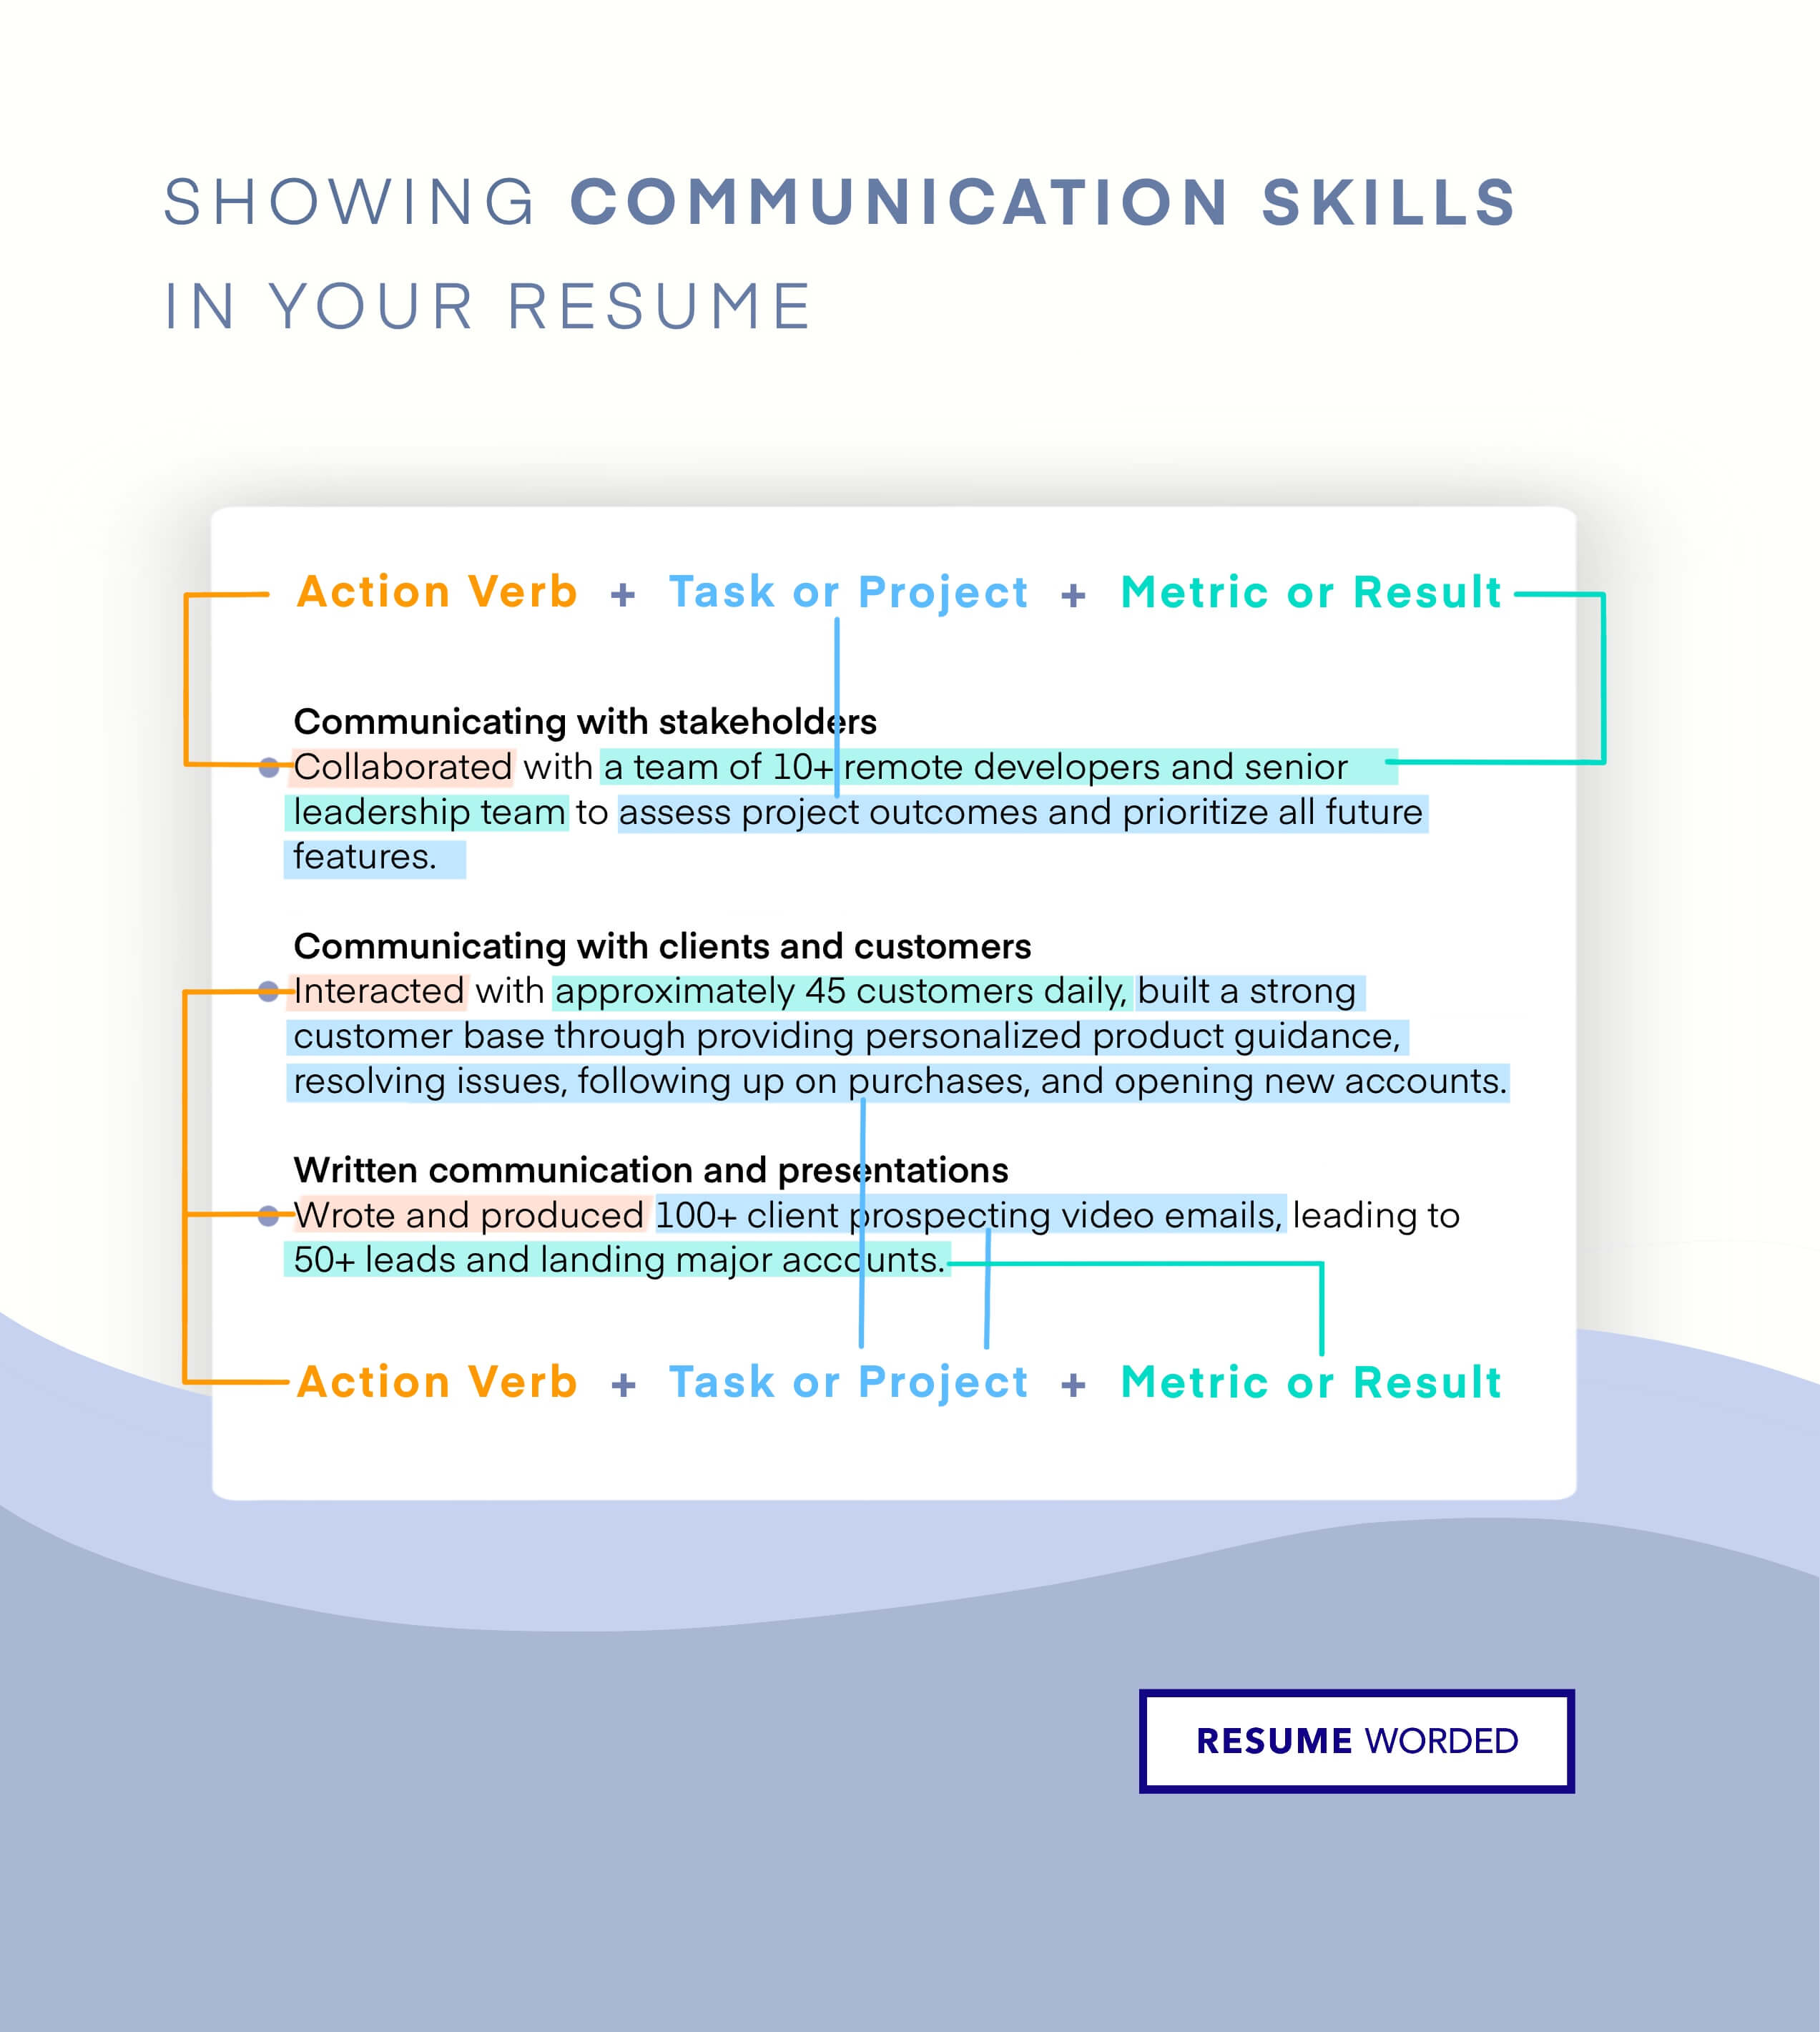 List any extra communication skills and experience. - Talent Acquisition Lead Resume